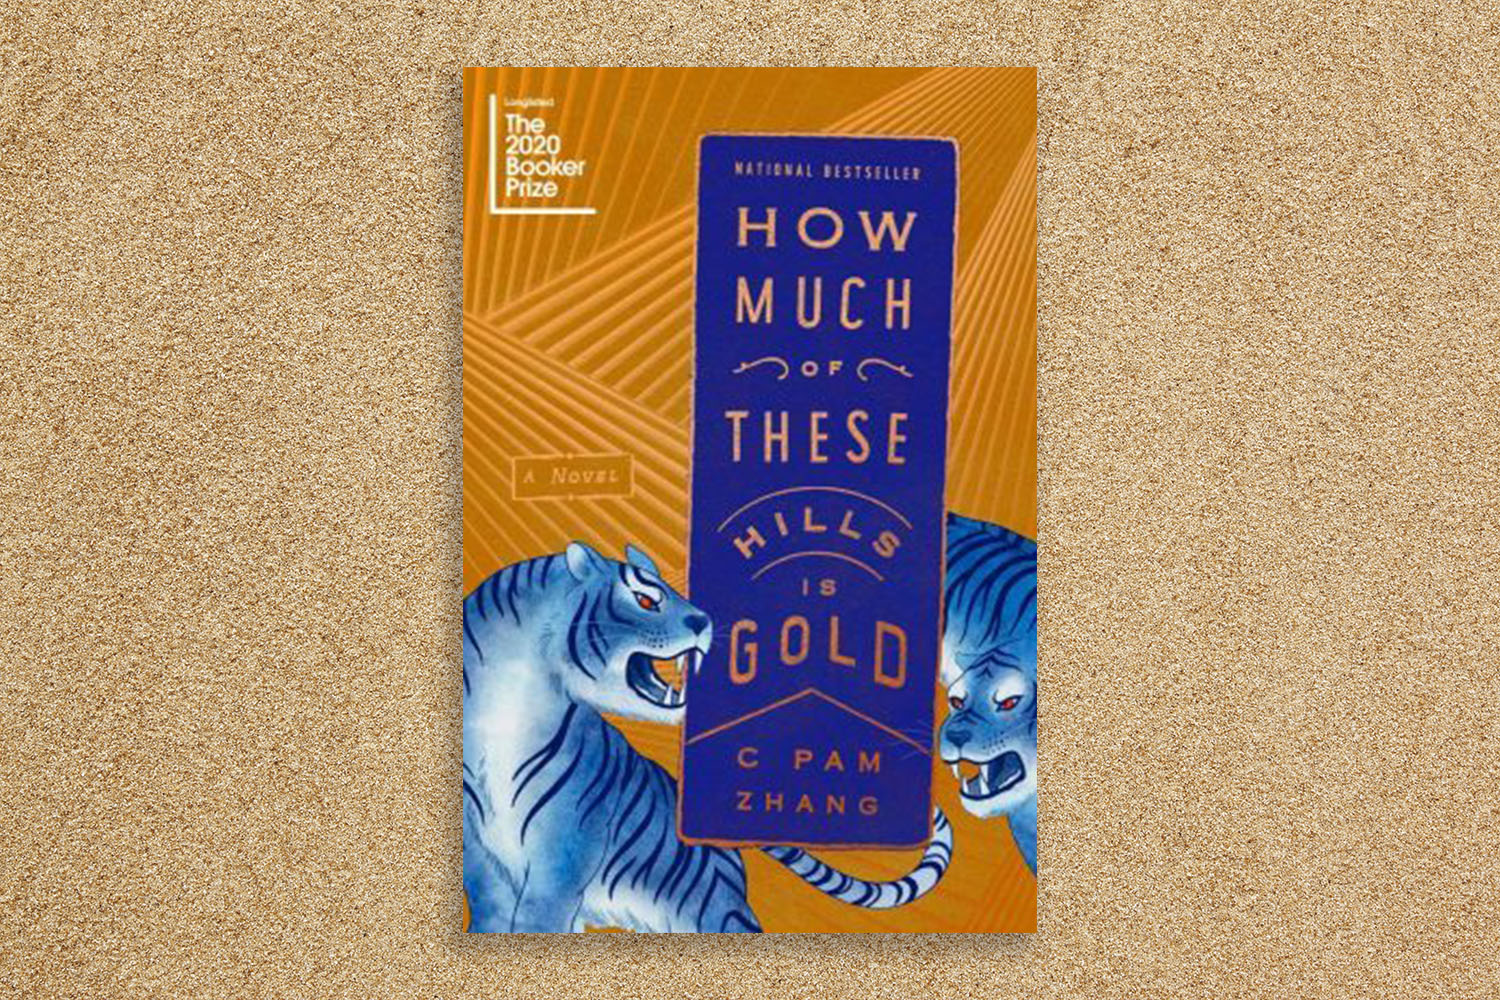 "How Much of These Hills Is Gold" cover.